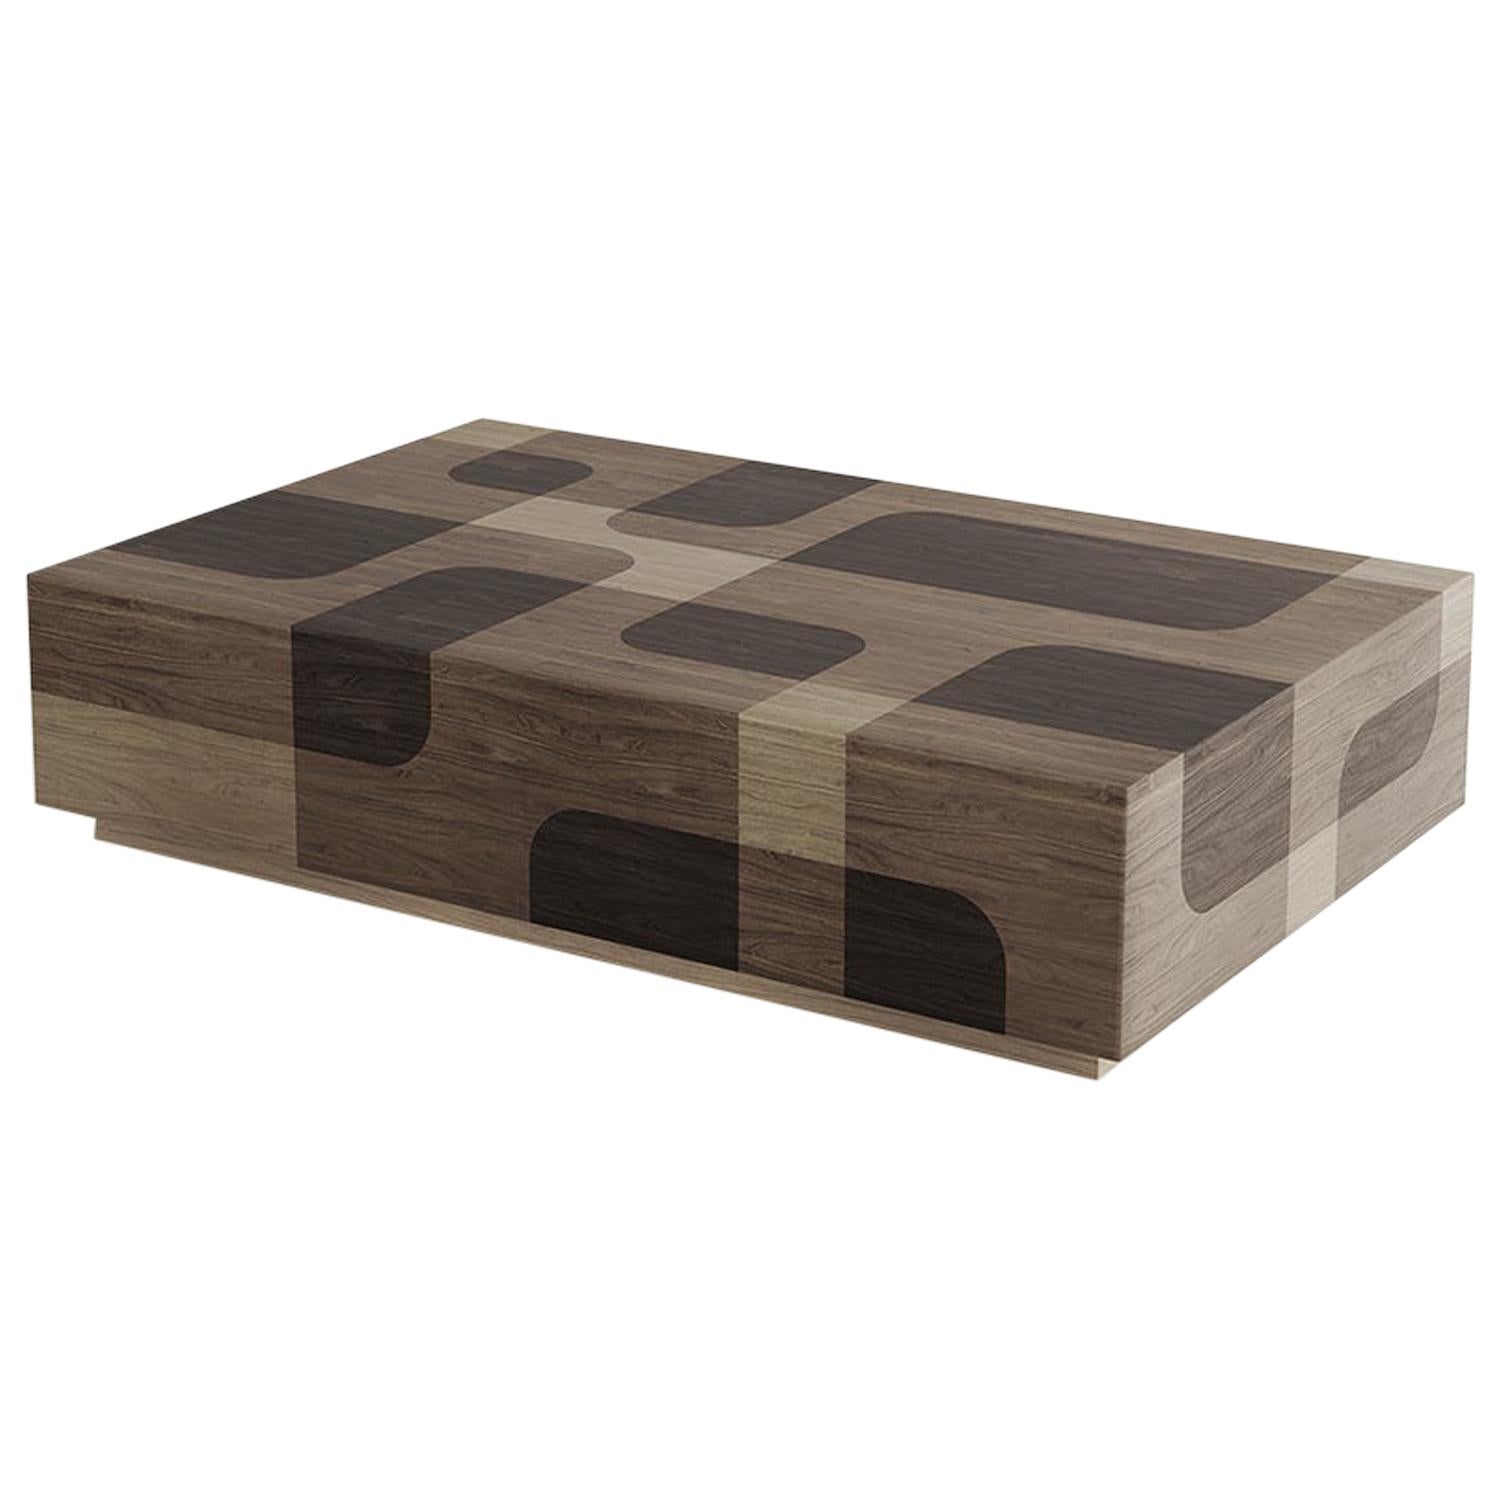 The depth of one object goes beyond its dimensions.
Natural Patterned wood rectangular coffee table is a furniture piece that by its material and finish simulates the three-dimensional sensation generated by one surface flying over another. Where